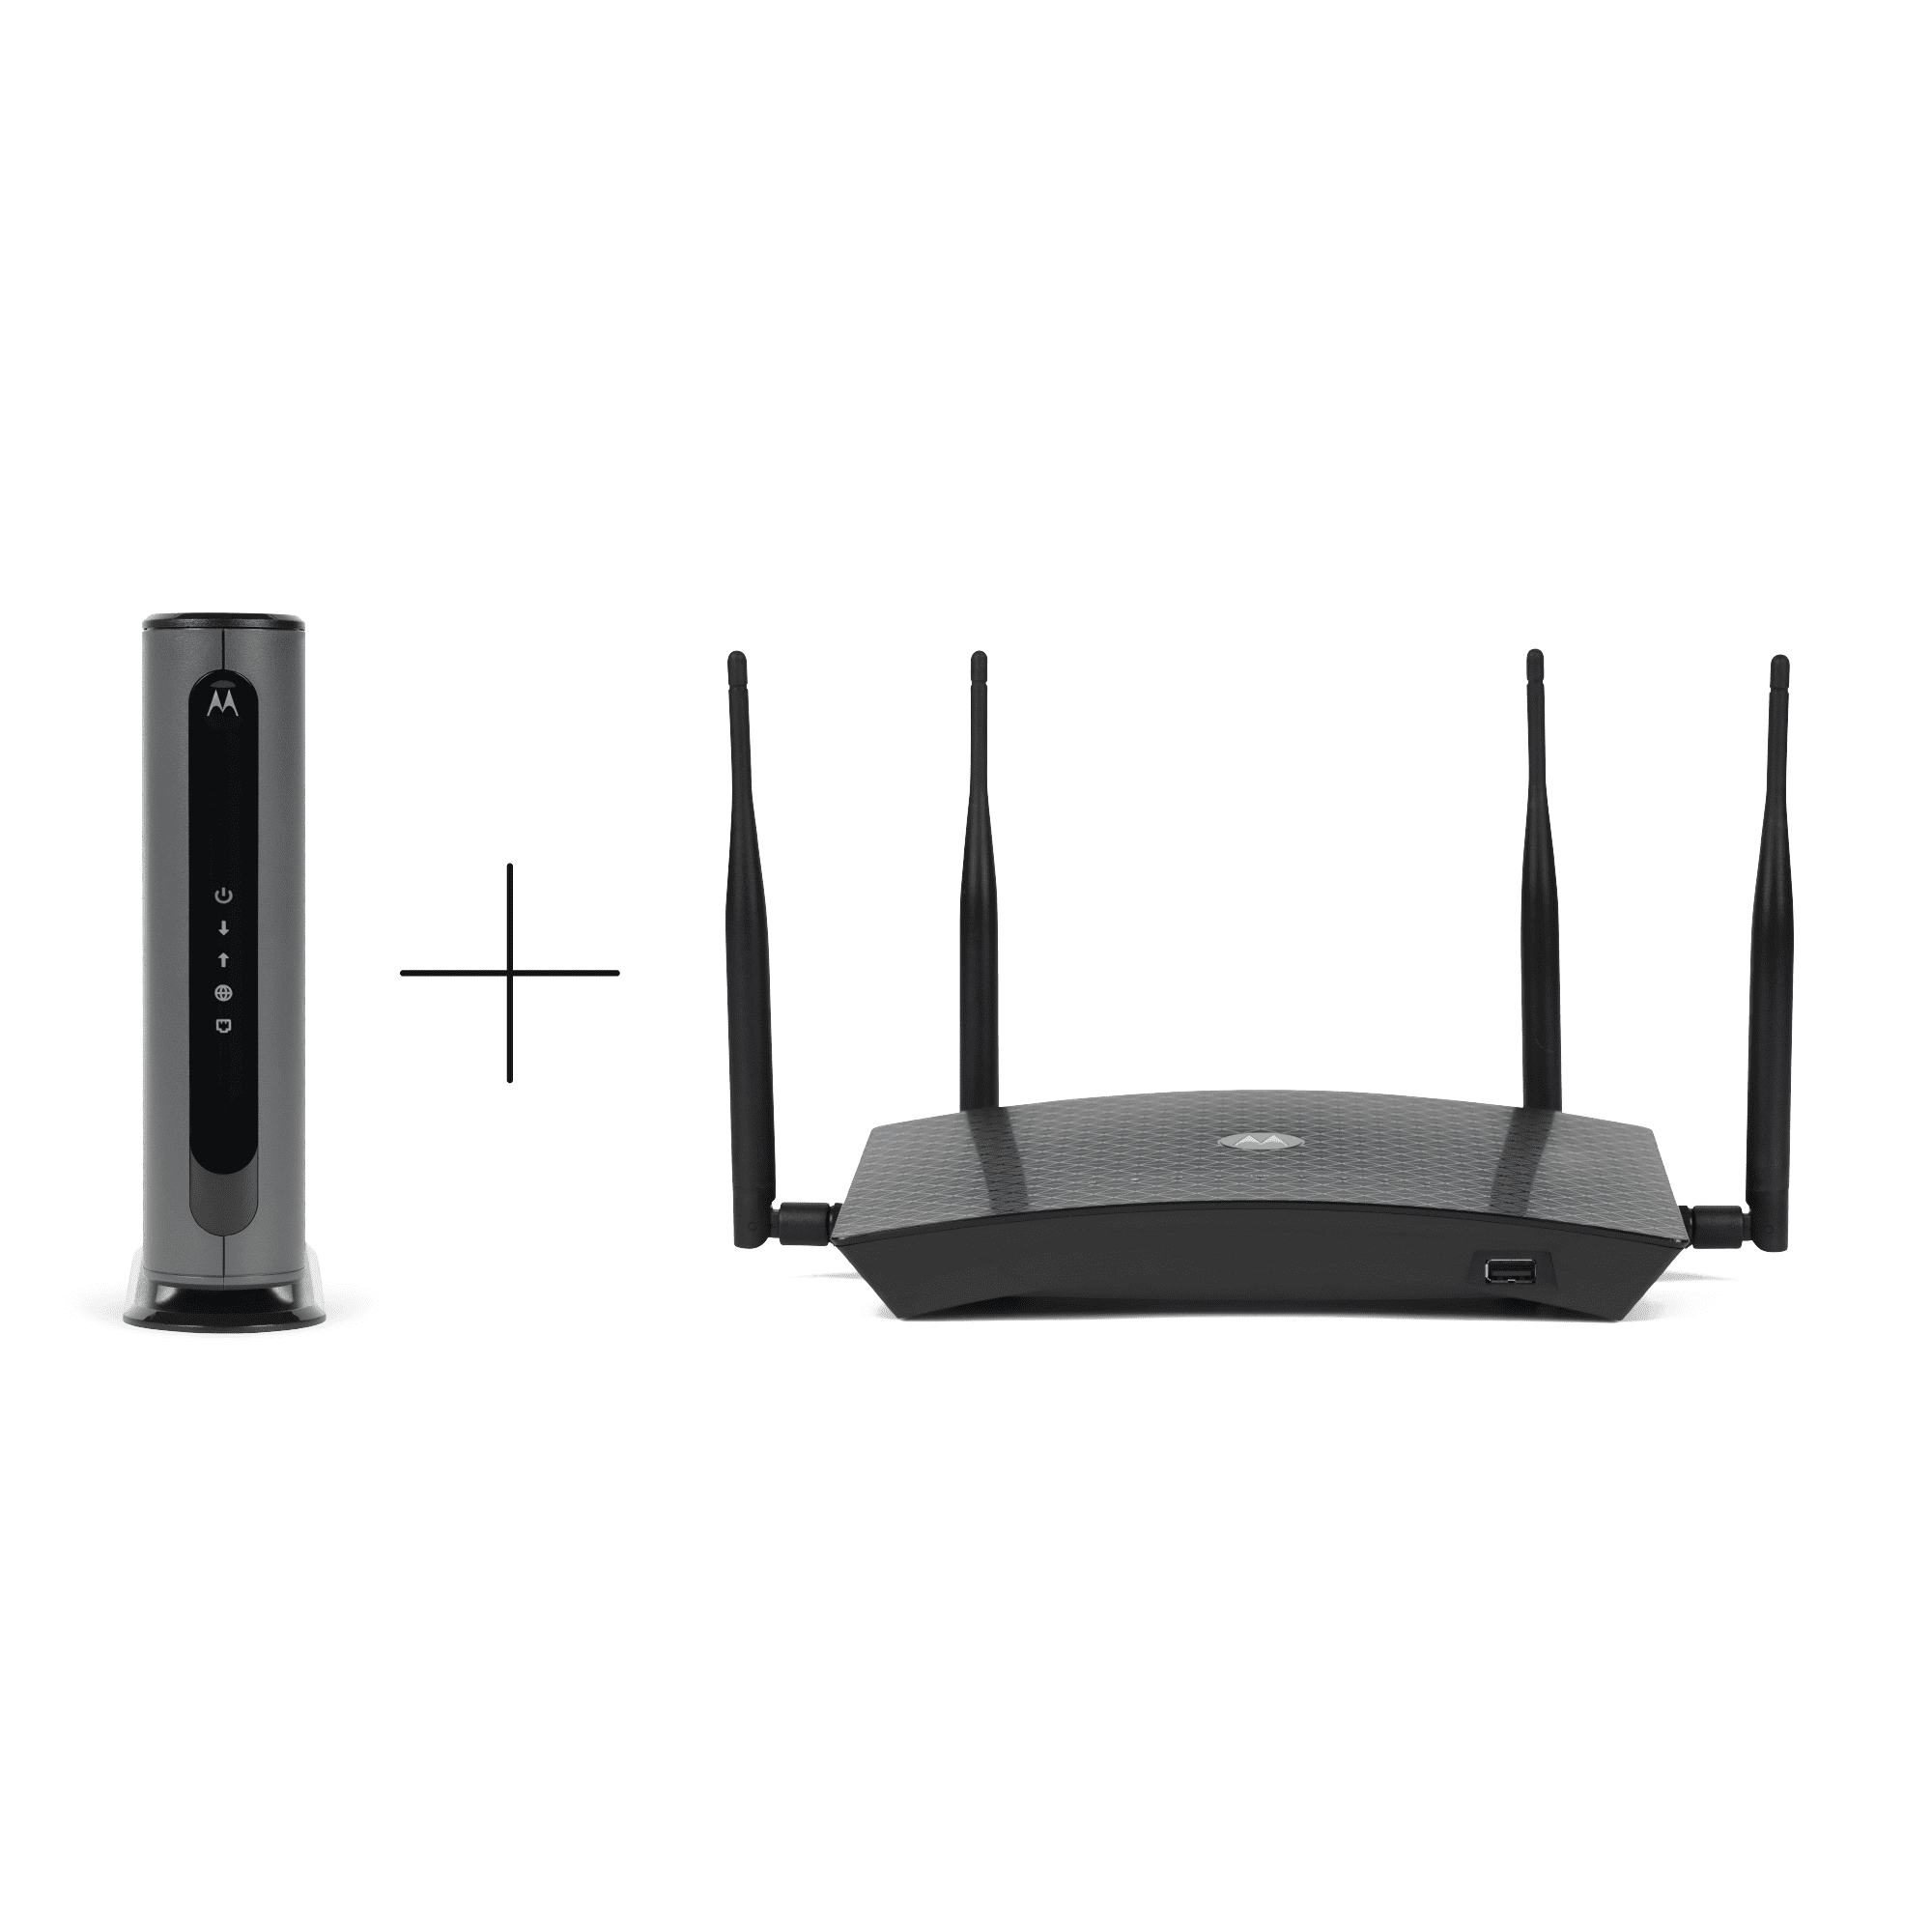 Ranking Our Top 3 5G Routers – RCN Technologies